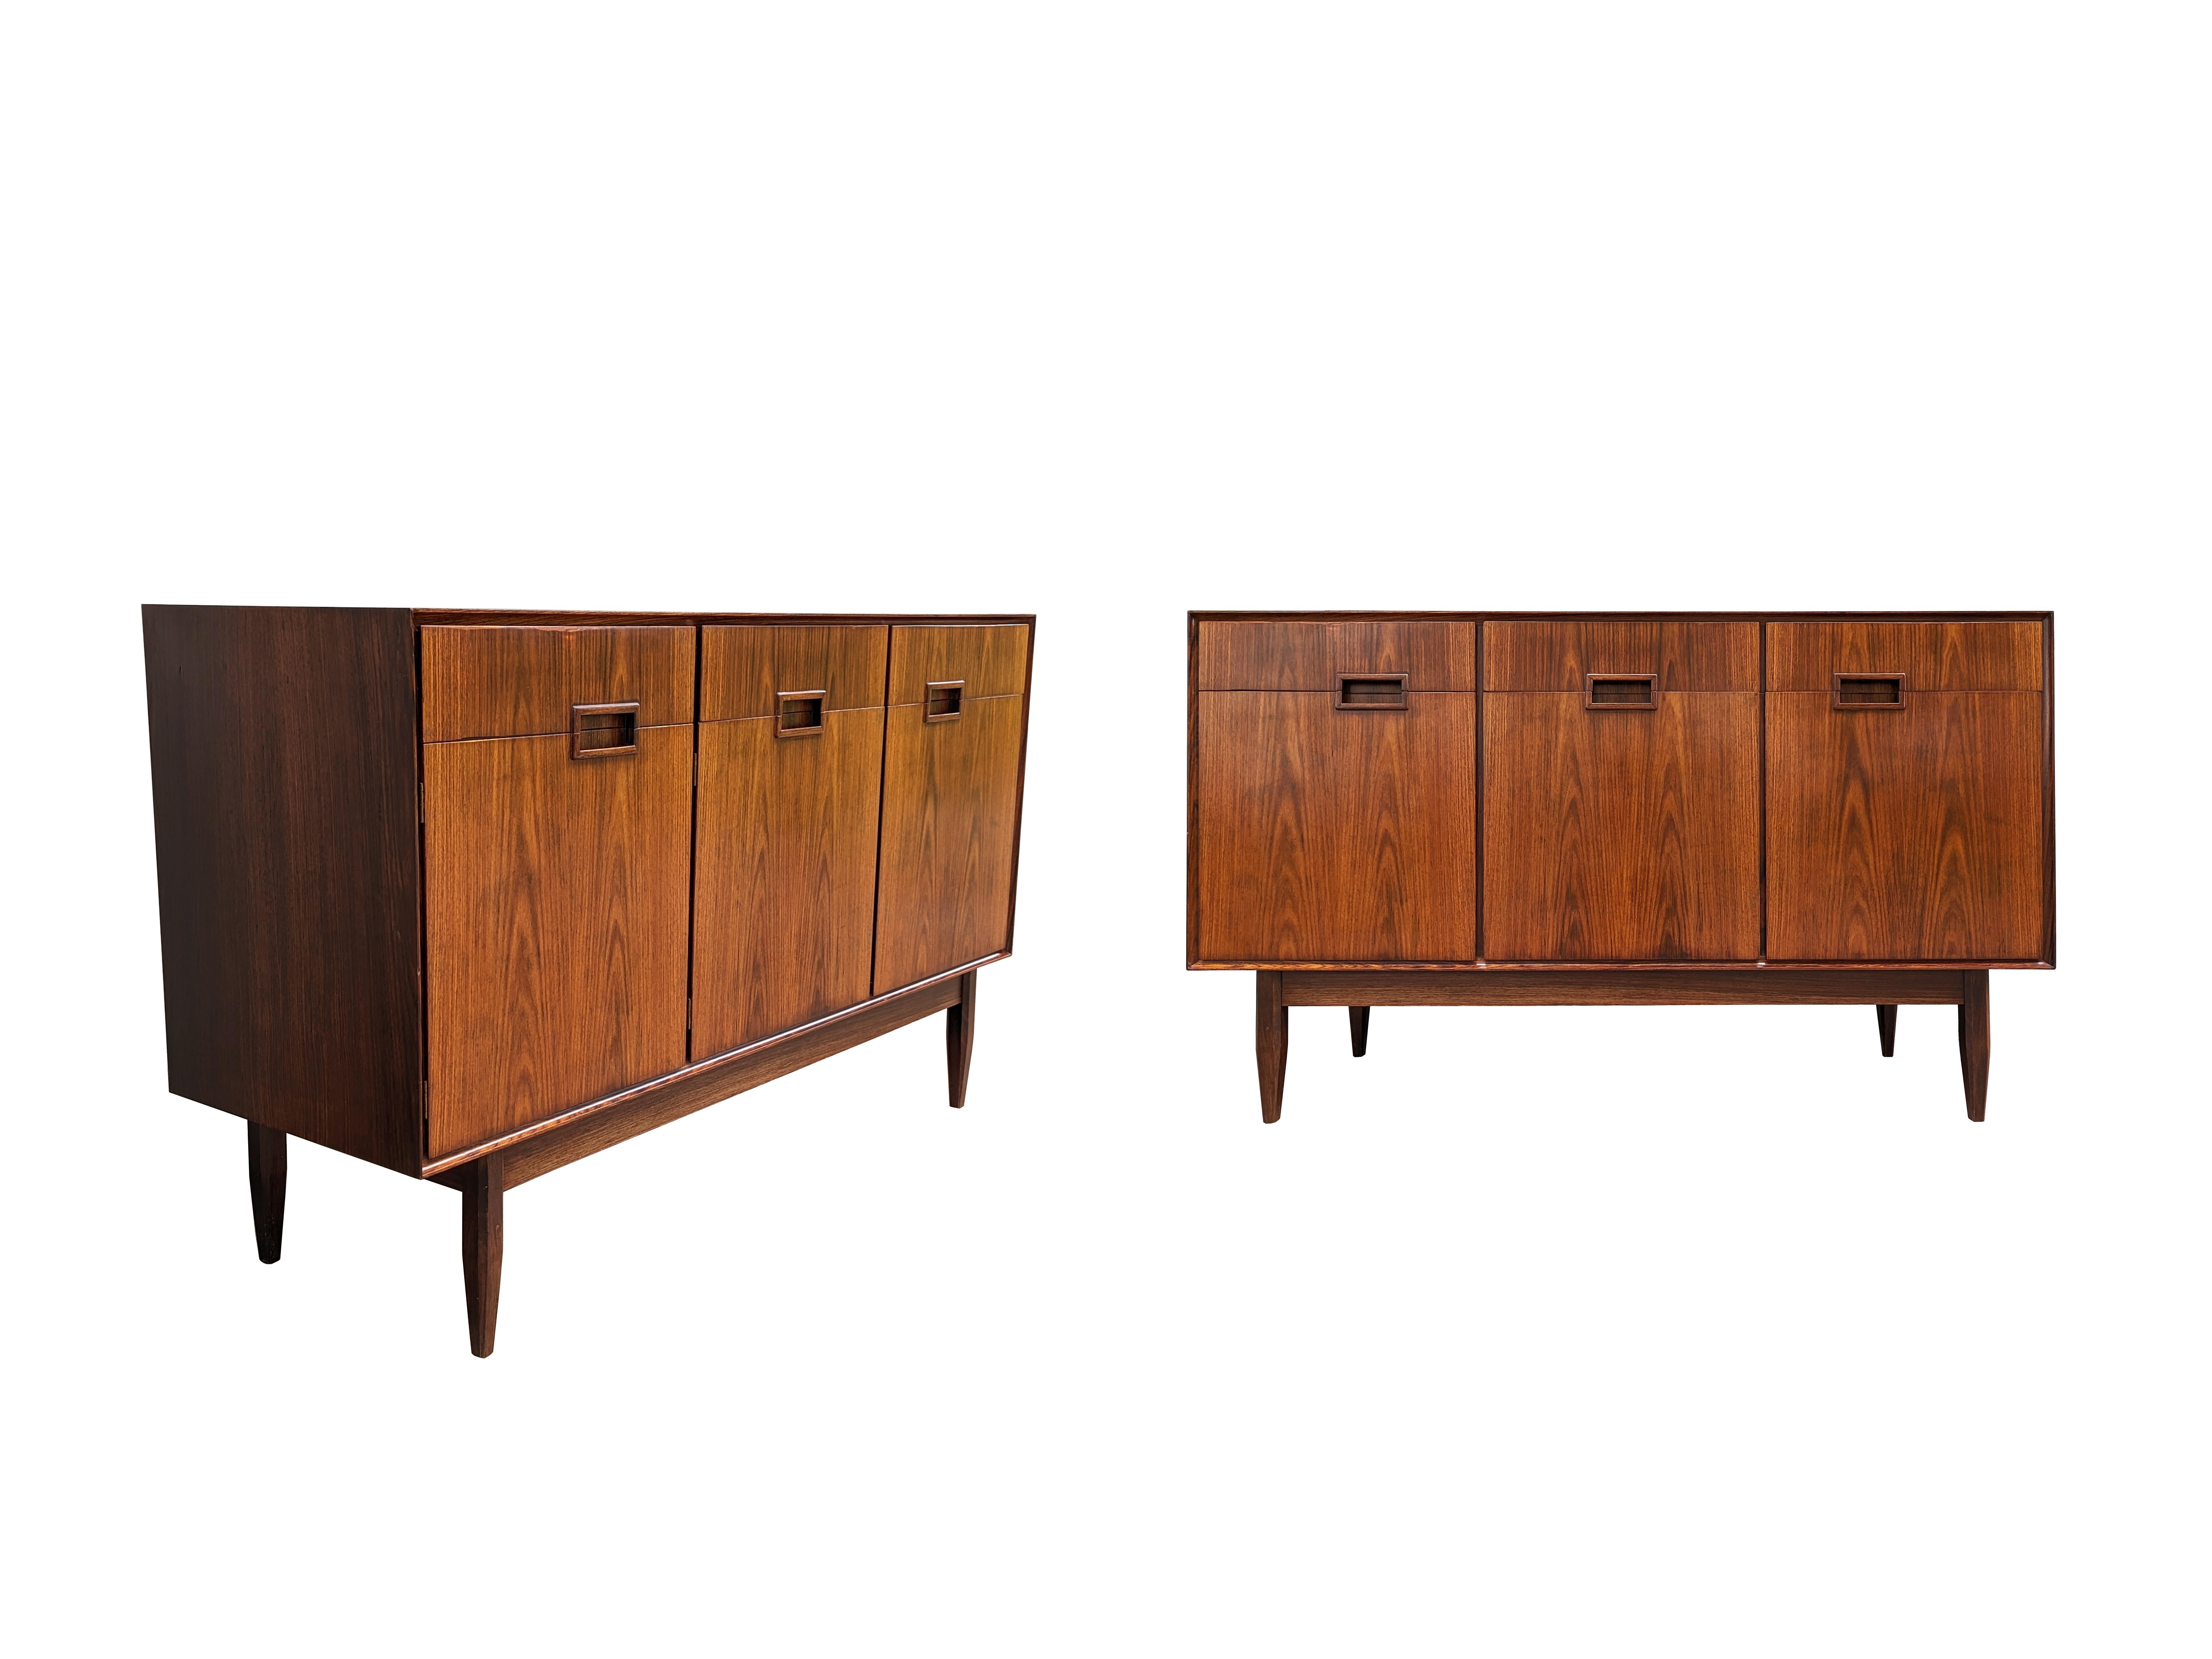 Italian Wooden Mid Century Modern Sideboards in the style of Dassi, set of 2 For Sale 11